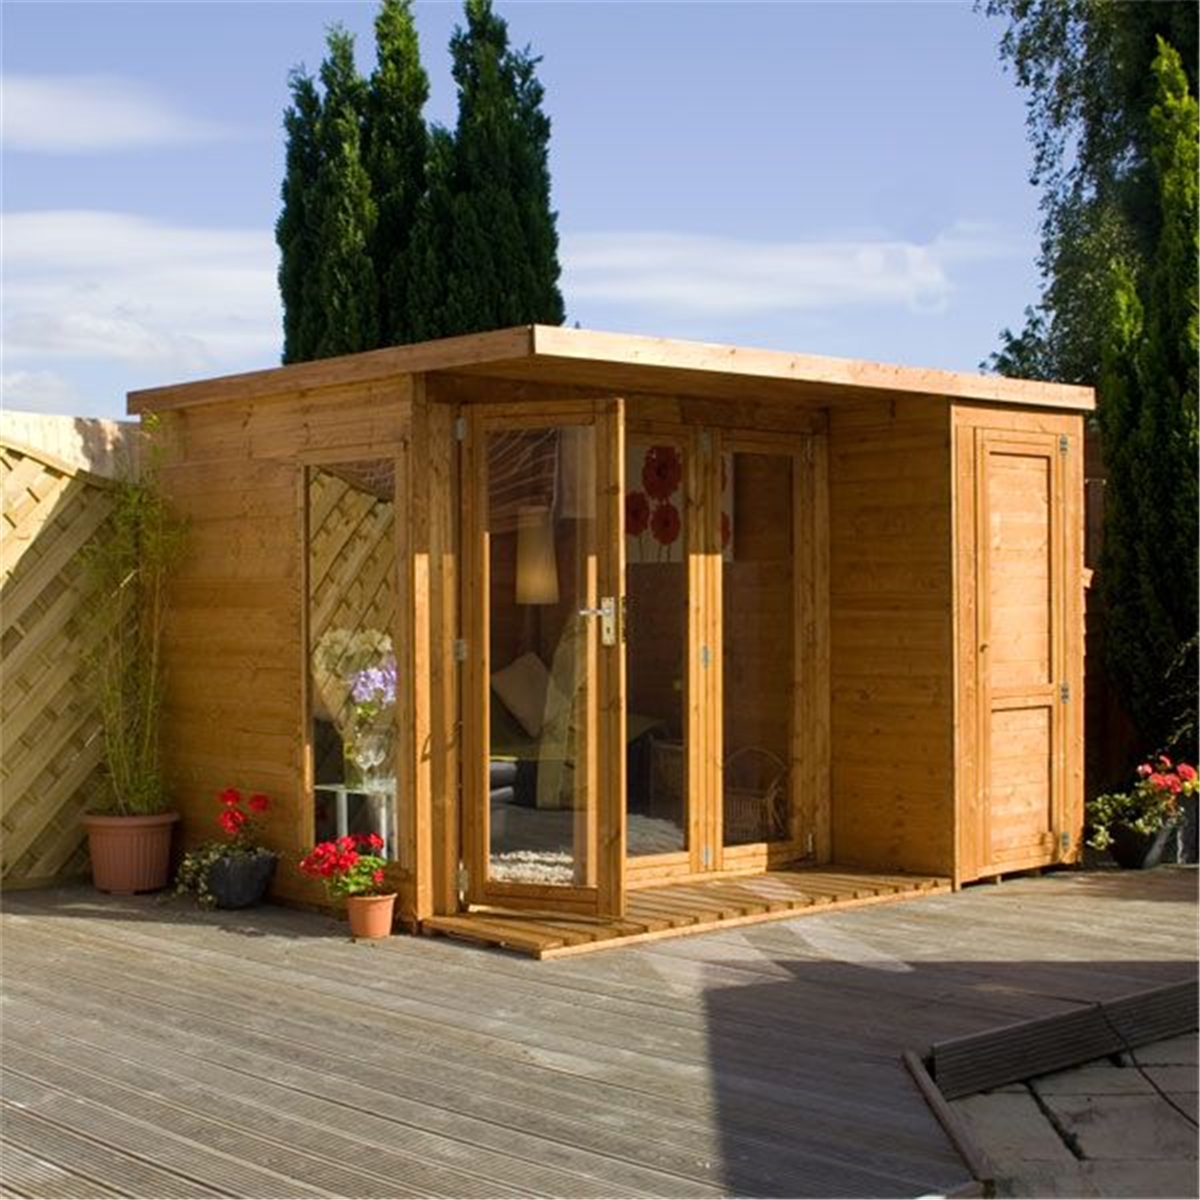 INSTALLED 10 x 8 Contempory Gardenroom Large Combi (12mm 